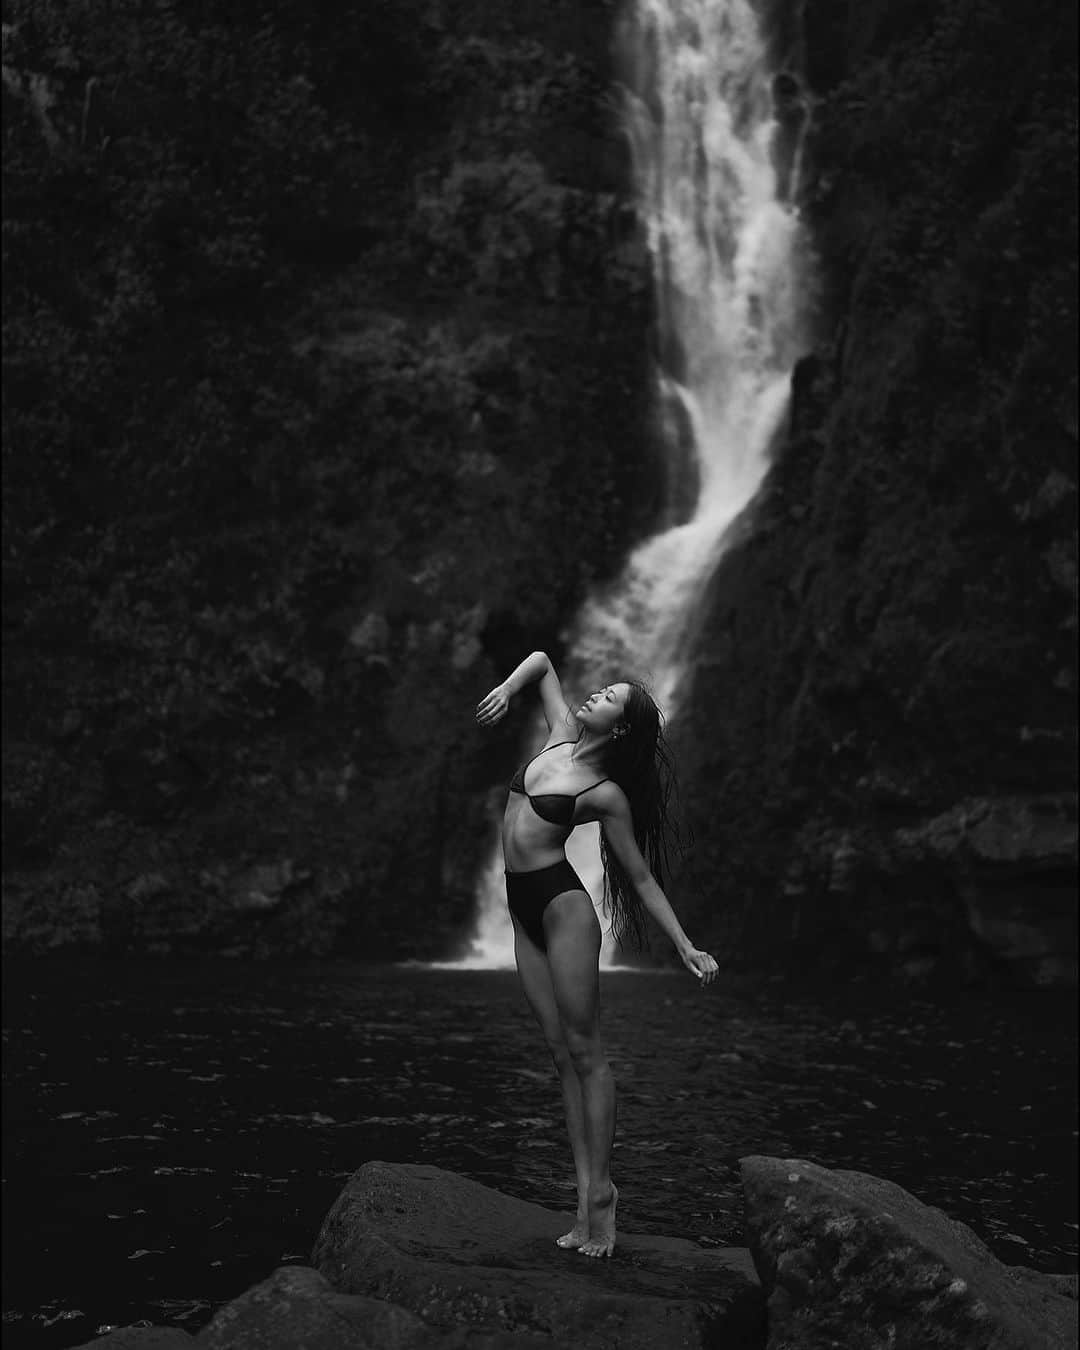 ballerina projectのインスタグラム：「𝐋𝐚𝐫𝐢𝐬𝐬𝐚 𝐋𝐞𝐮𝐧𝐠 at Moa’lua Falls on the island of Molokai.   @larissaleung_ #larissaleung #ballerinaproject #molokai #moaulafalls #hawaii #waterfall   Ballerina Project 𝗹𝗮𝗿𝗴𝗲 𝗳𝗼𝗿𝗺𝗮𝘁 𝗹𝗶𝗺𝗶𝘁𝗲𝗱 𝗲𝗱𝘁𝗶𝗼𝗻 𝗽𝗿𝗶𝗻𝘁𝘀 and 𝗜𝗻𝘀𝘁𝗮𝘅 𝗰𝗼𝗹𝗹𝗲𝗰𝘁𝗶𝗼𝗻𝘀 on sale in our Etsy store. Link is located in our bio.  𝙎𝙪𝙗𝙨𝙘𝙧𝙞𝙗𝙚 to the 𝐁𝐚𝐥𝐥𝐞𝐫𝐢𝐧𝐚 𝐏𝐫𝐨𝐣𝐞𝐜𝐭 on Instagram to have access to exclusive and never seen before content. 🩰」